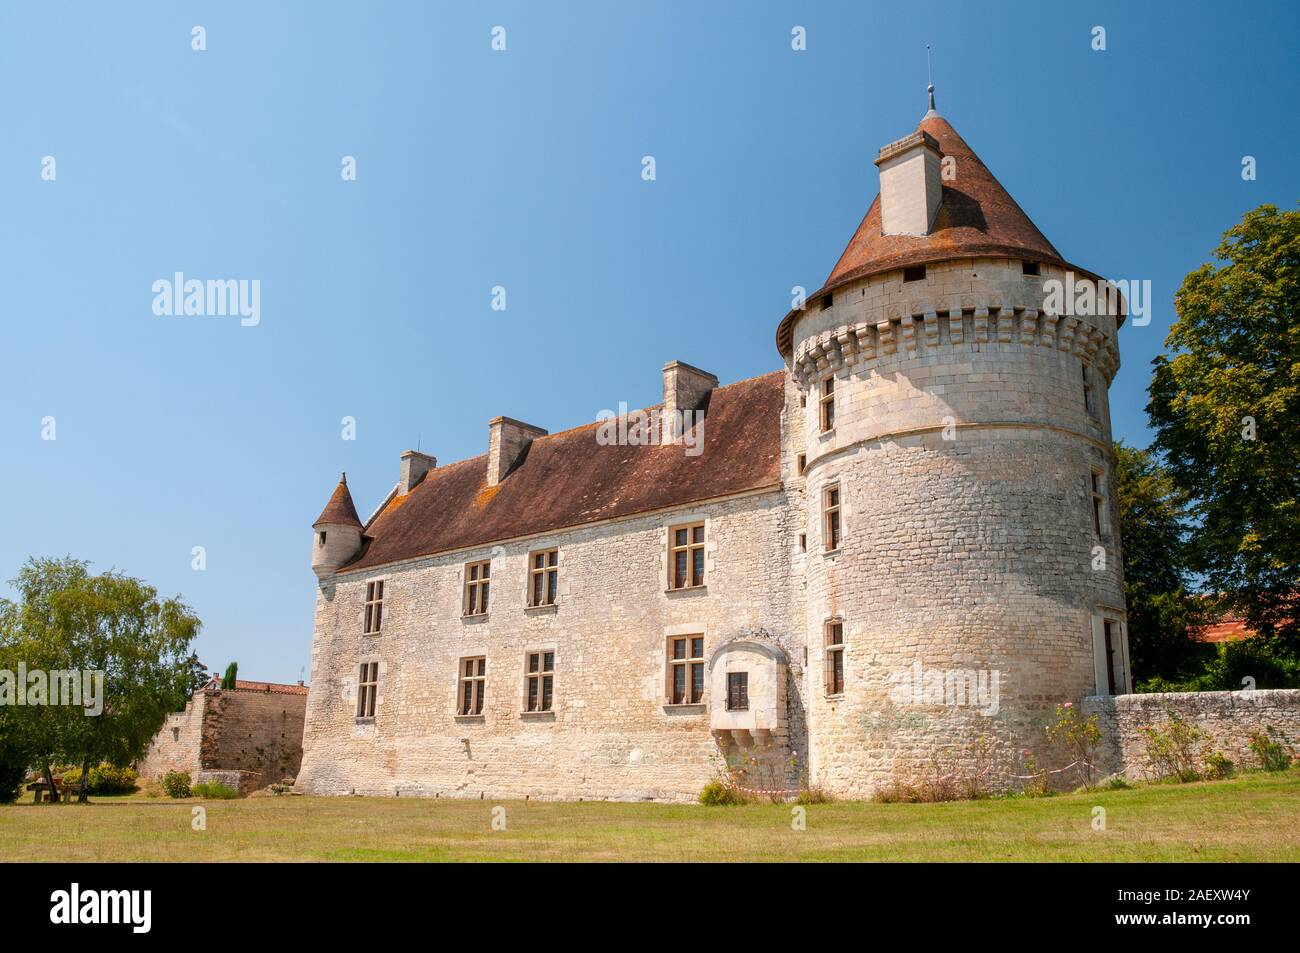 Bayers castle, a listed historic monument, privately owned but opened to the public for visits, located in the village of Bayers, Charente (16), Nouve Stock Photo